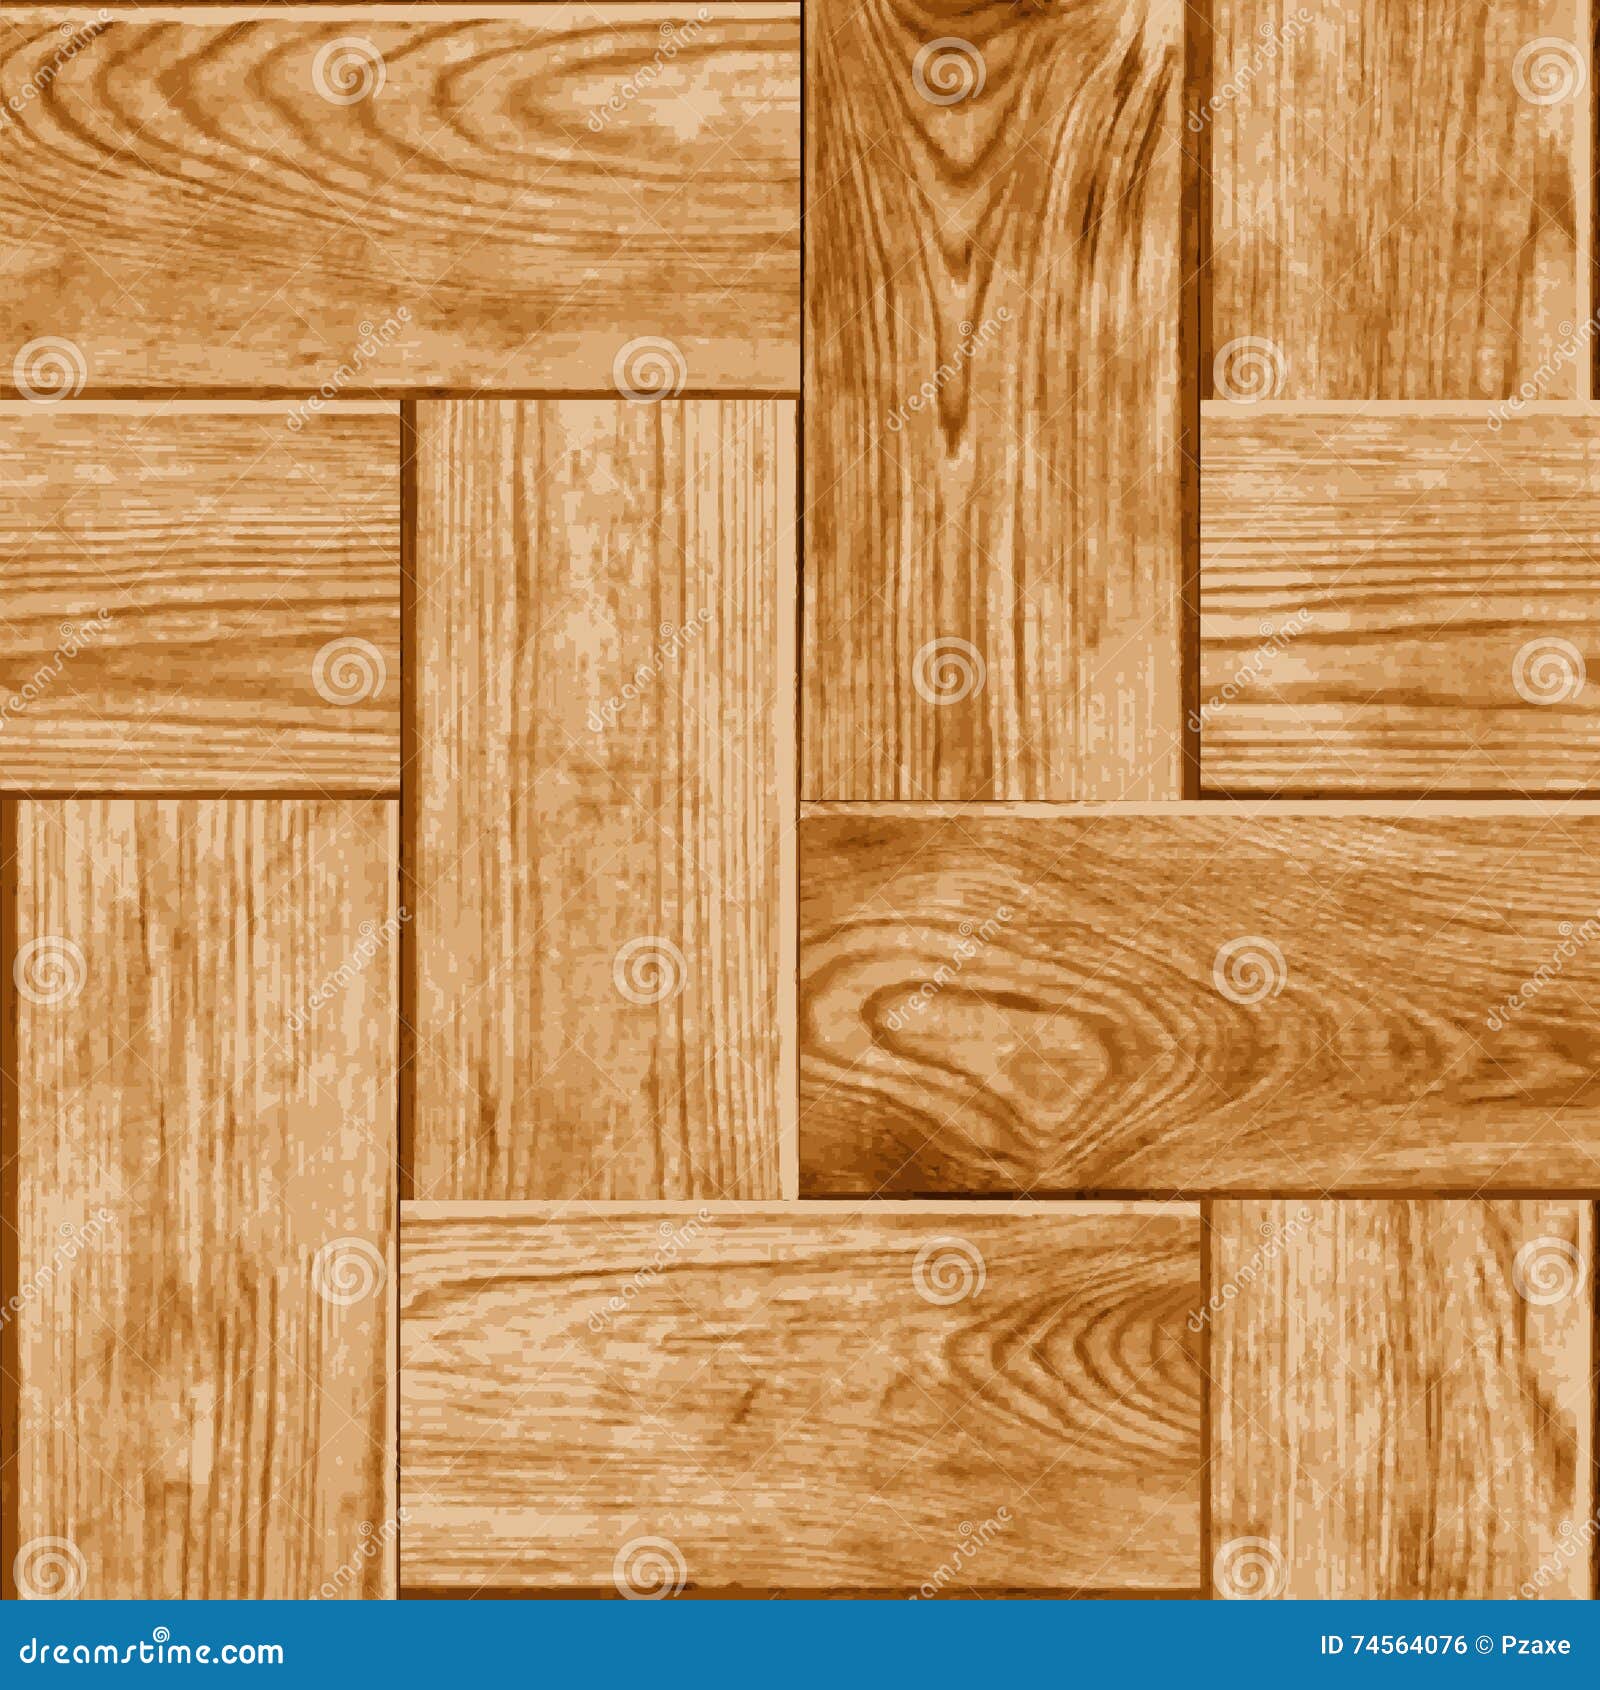  seamless tile with a digital representation of wood parquet floo